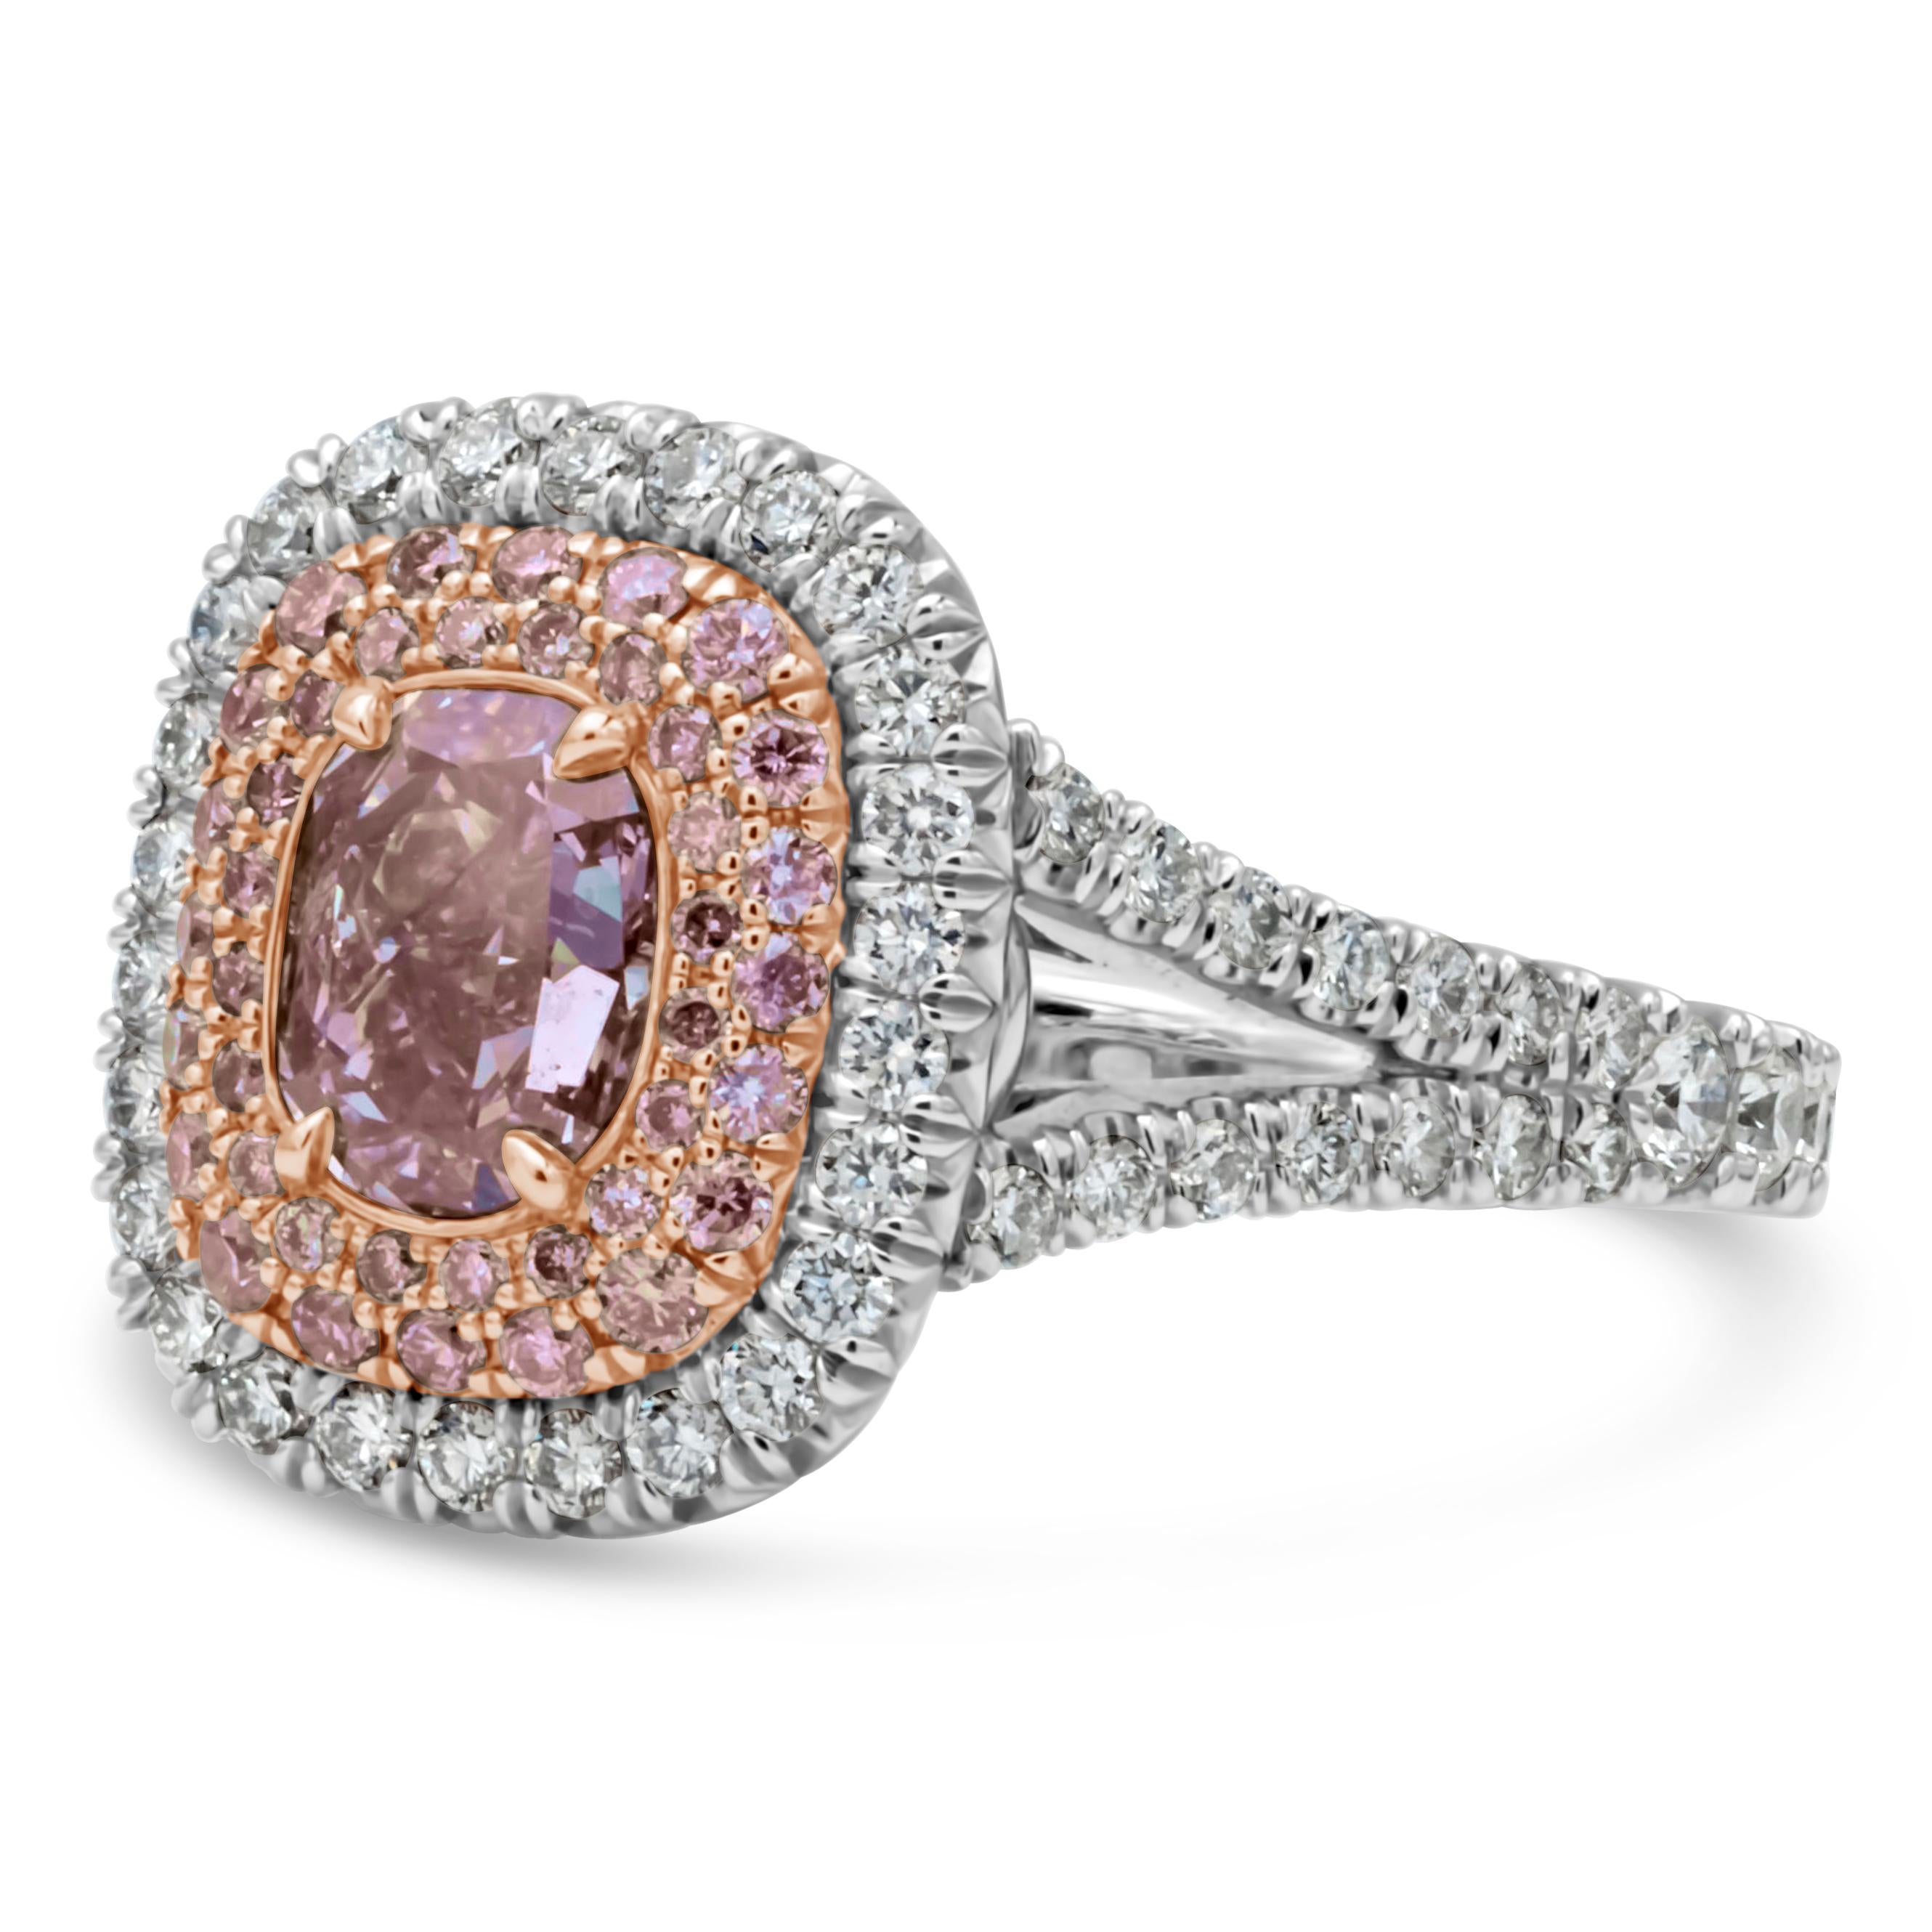 Well crafted and rare engagement ring featuring a colorful and vibrant 1.07 carat pink diamond that GIA certified as fancy purplish pink color, set in a four prong 18k rose gold basket. Center stone is surrounded by three rows of alternating pink